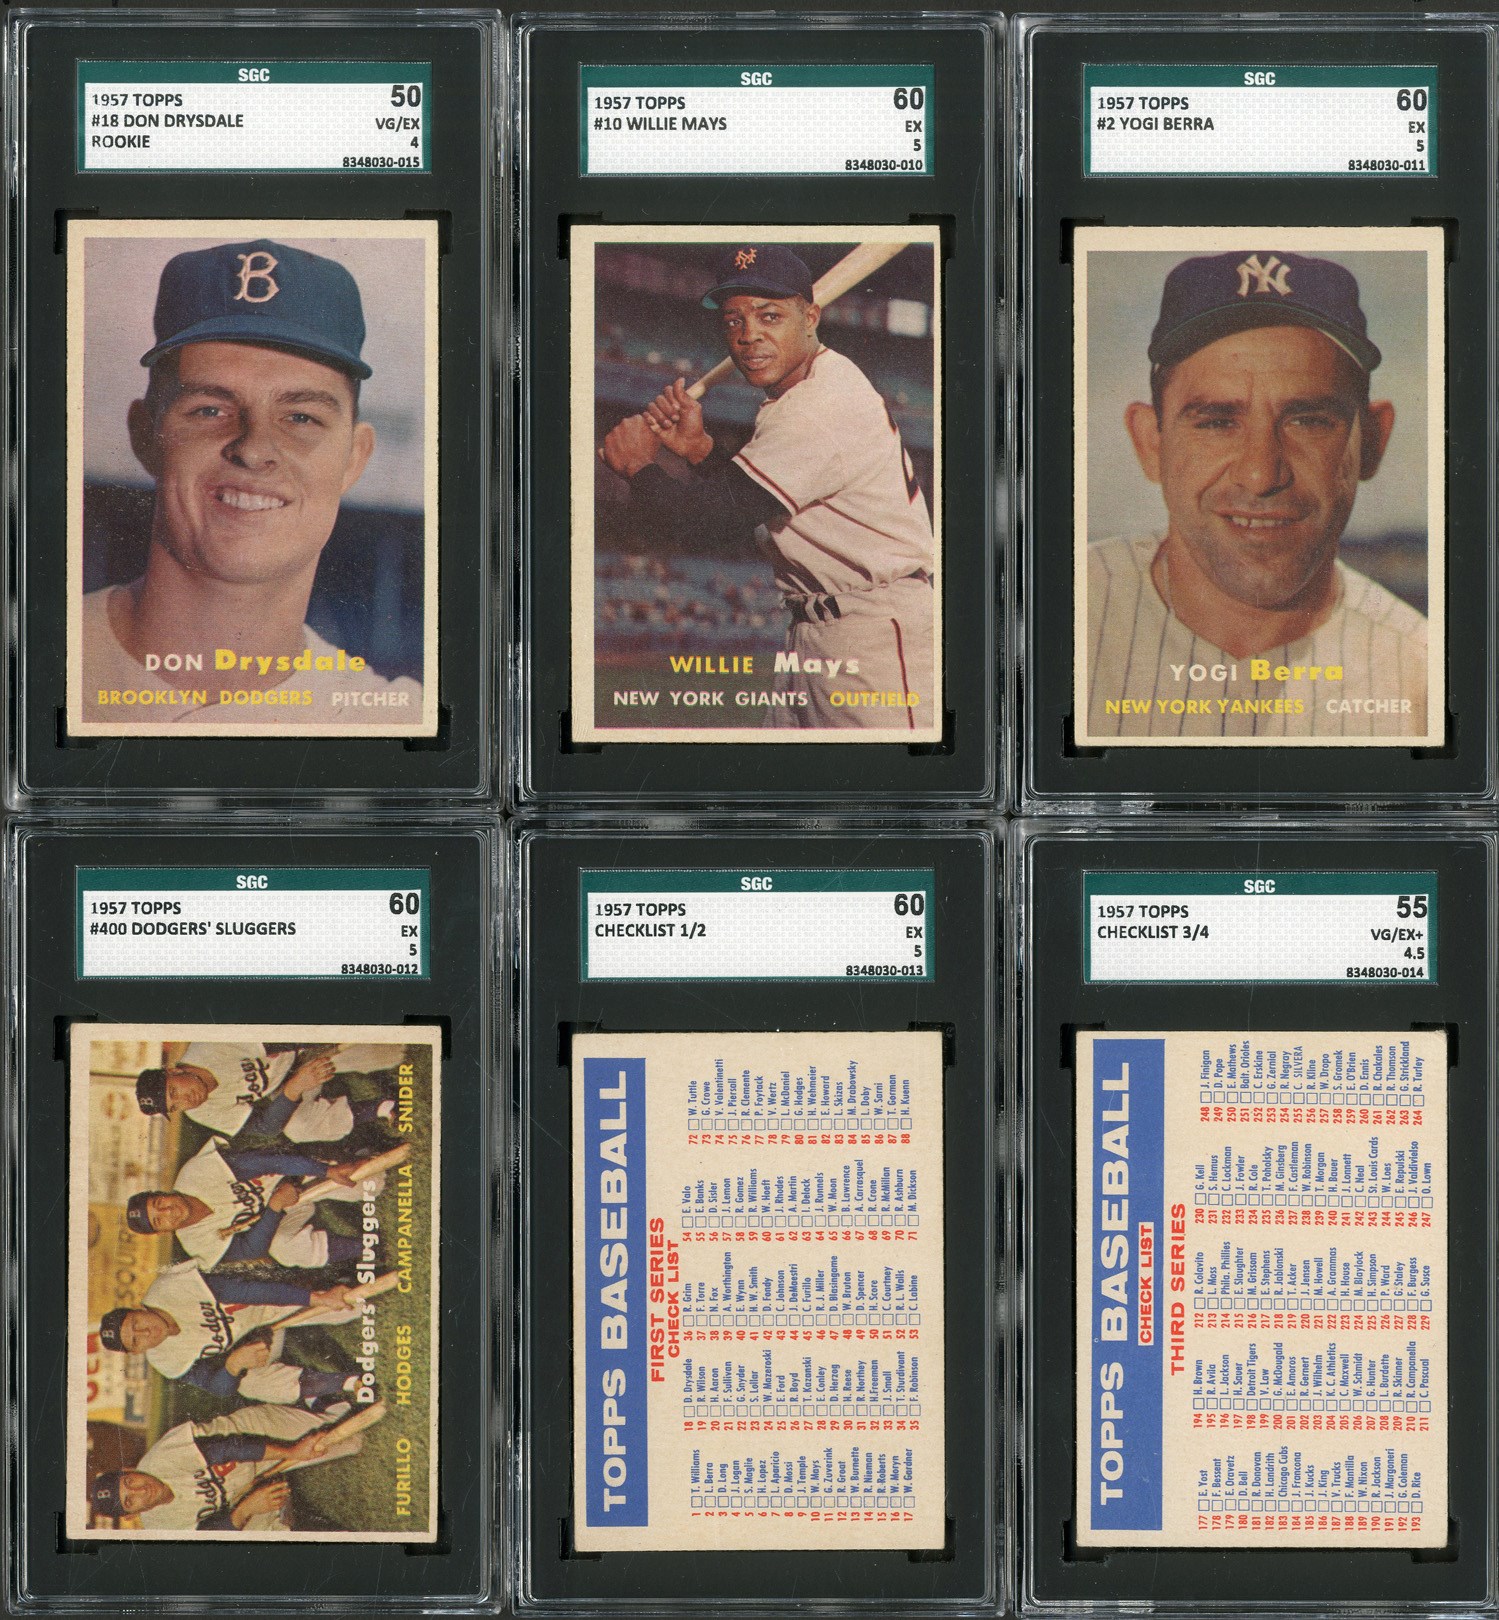 Baseball and Trading Cards - 1957 Topps Complete Set (407 cards - 6 SGC Graded)